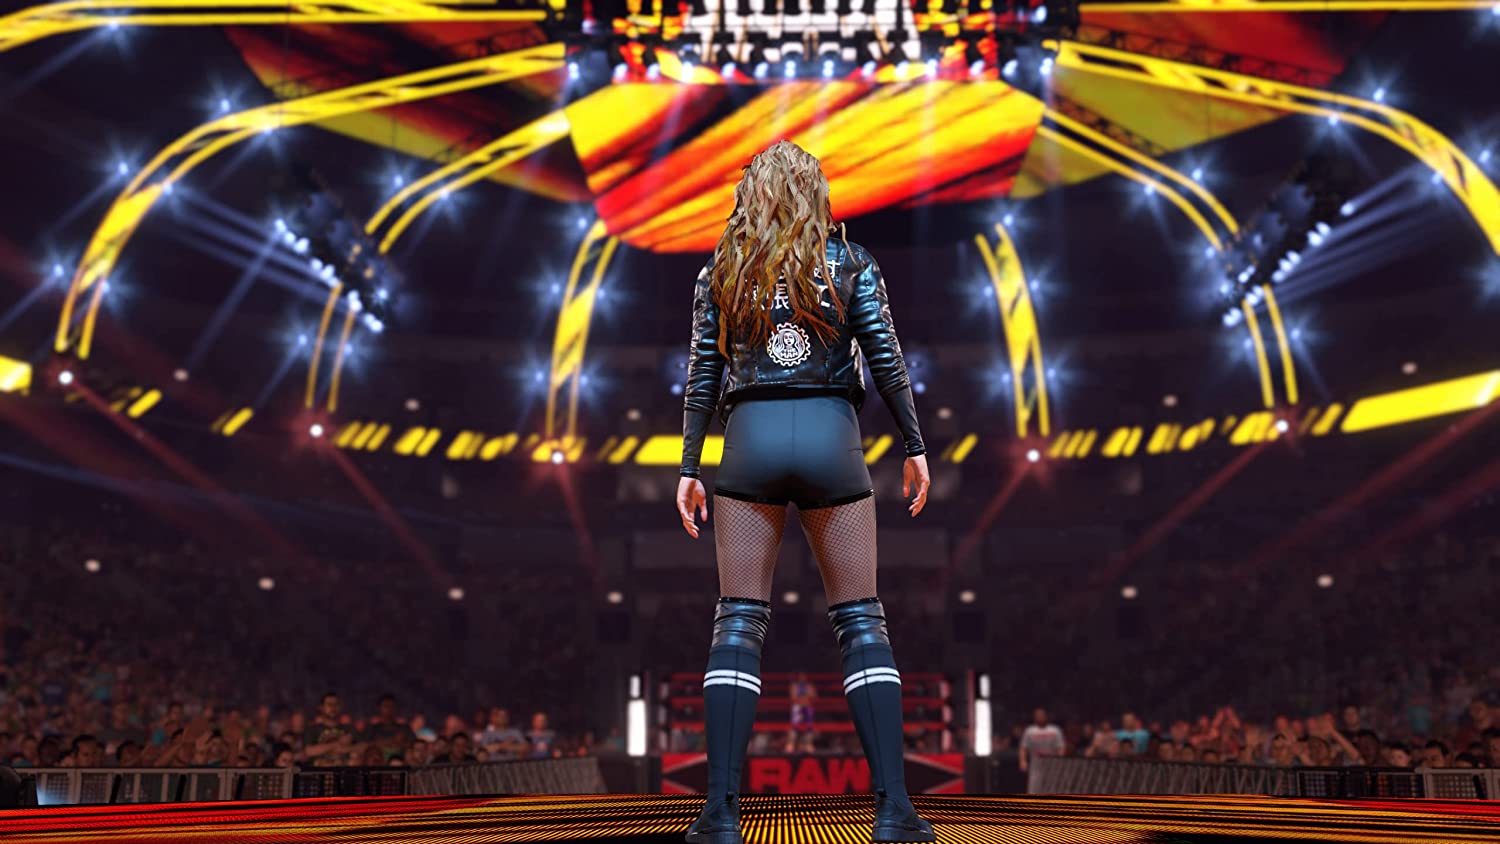 WWE 2K22 Roster: Deep Dive Into the Drama Surrounding It